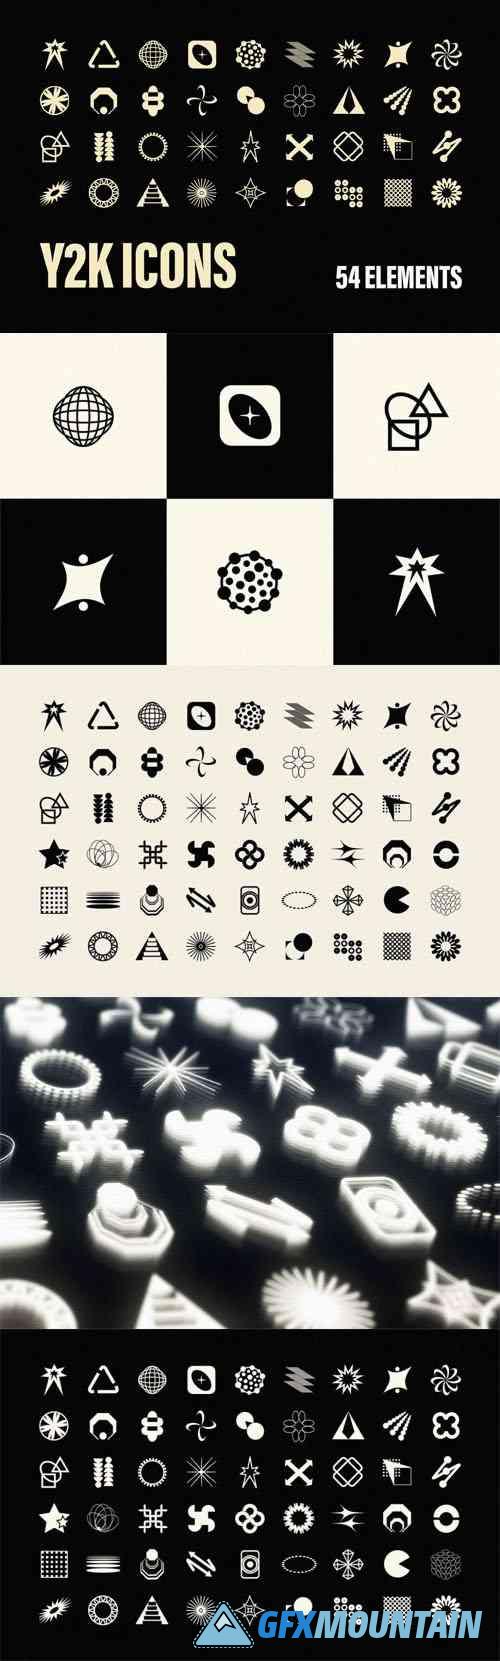 Y2K Icons - Vector Shapes Collection